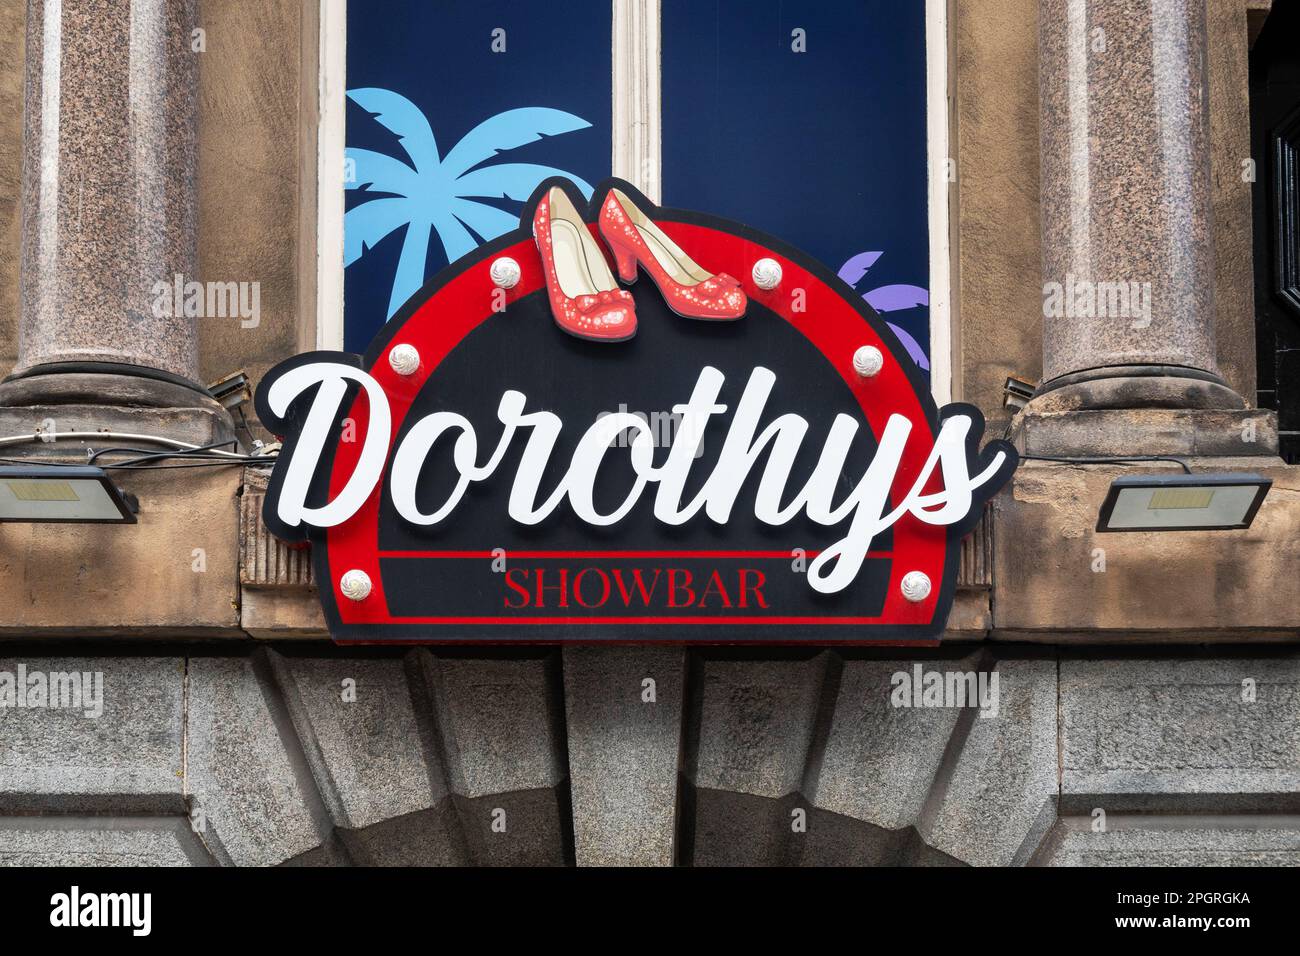 Dorothys, a late night Drag Club in Liverpool Stock Photo